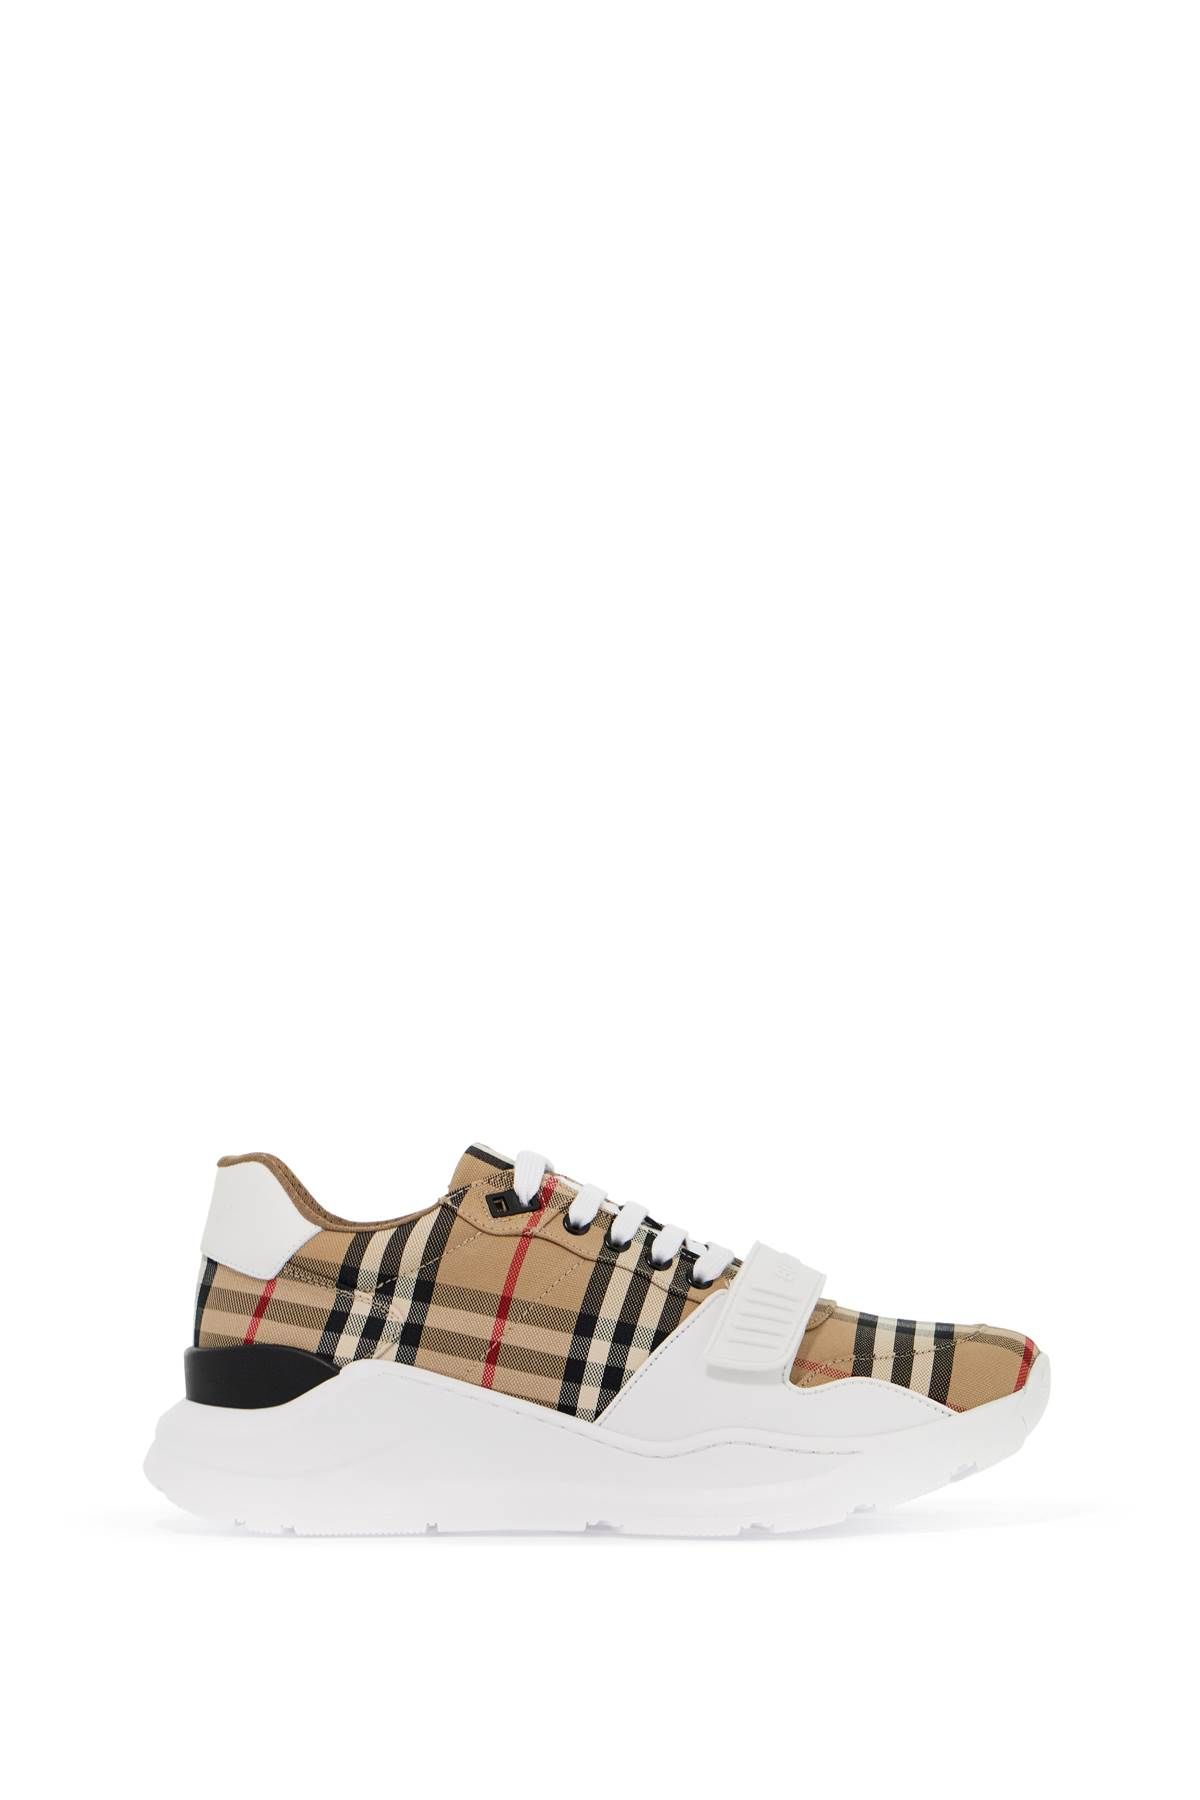 Burberry BURBERRY check fabric sneakers